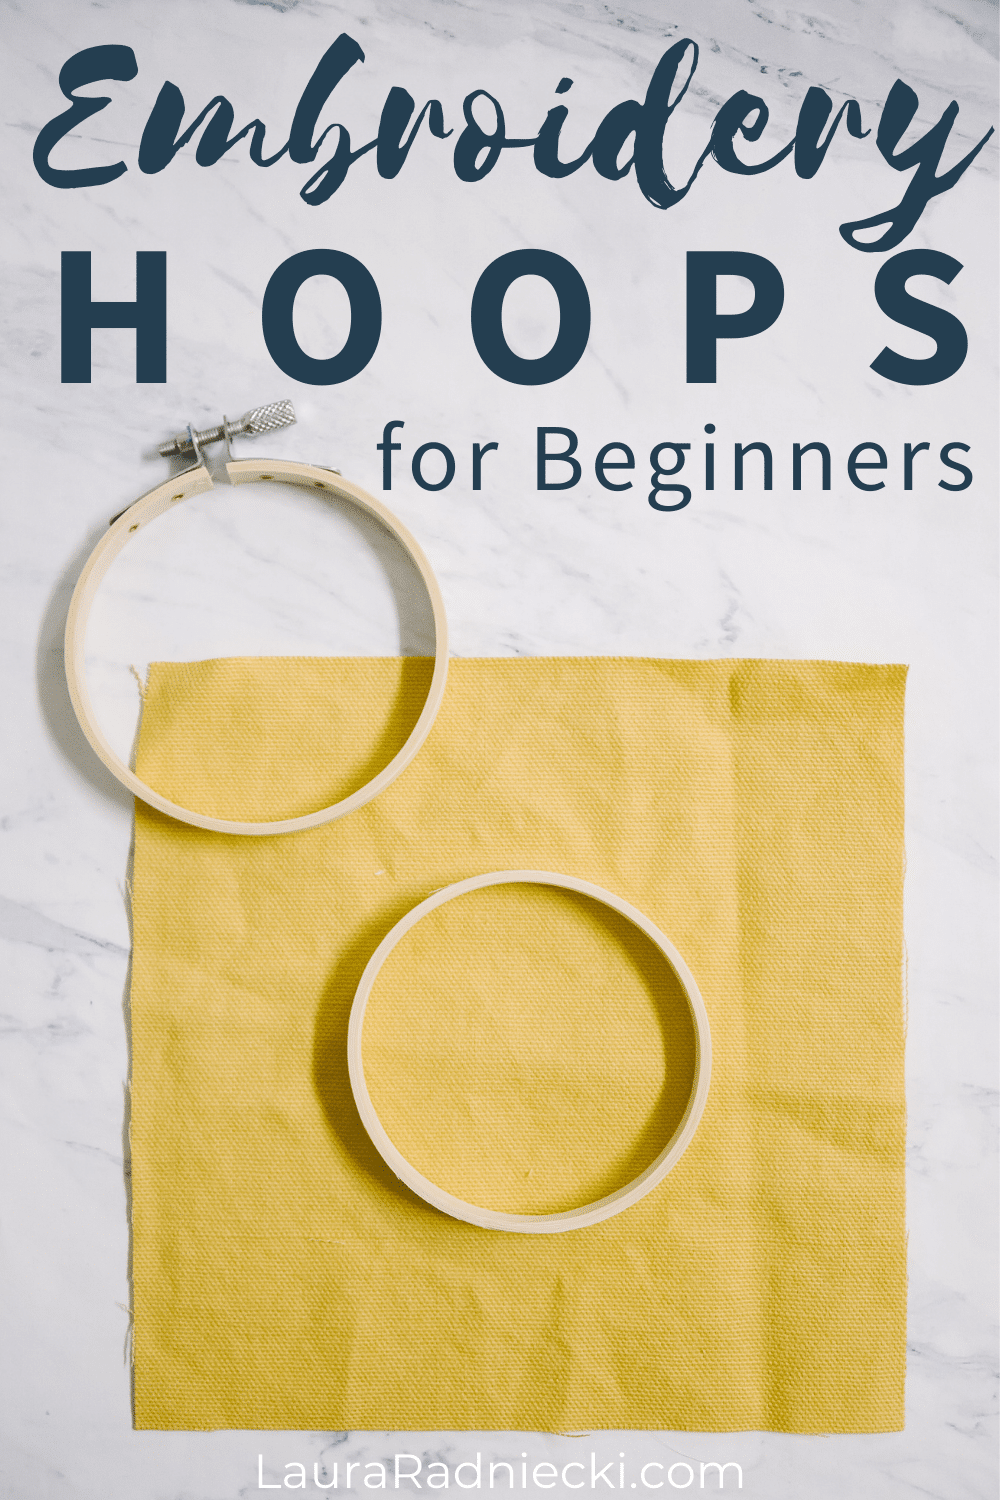 How to Use an Embroidery Hoop